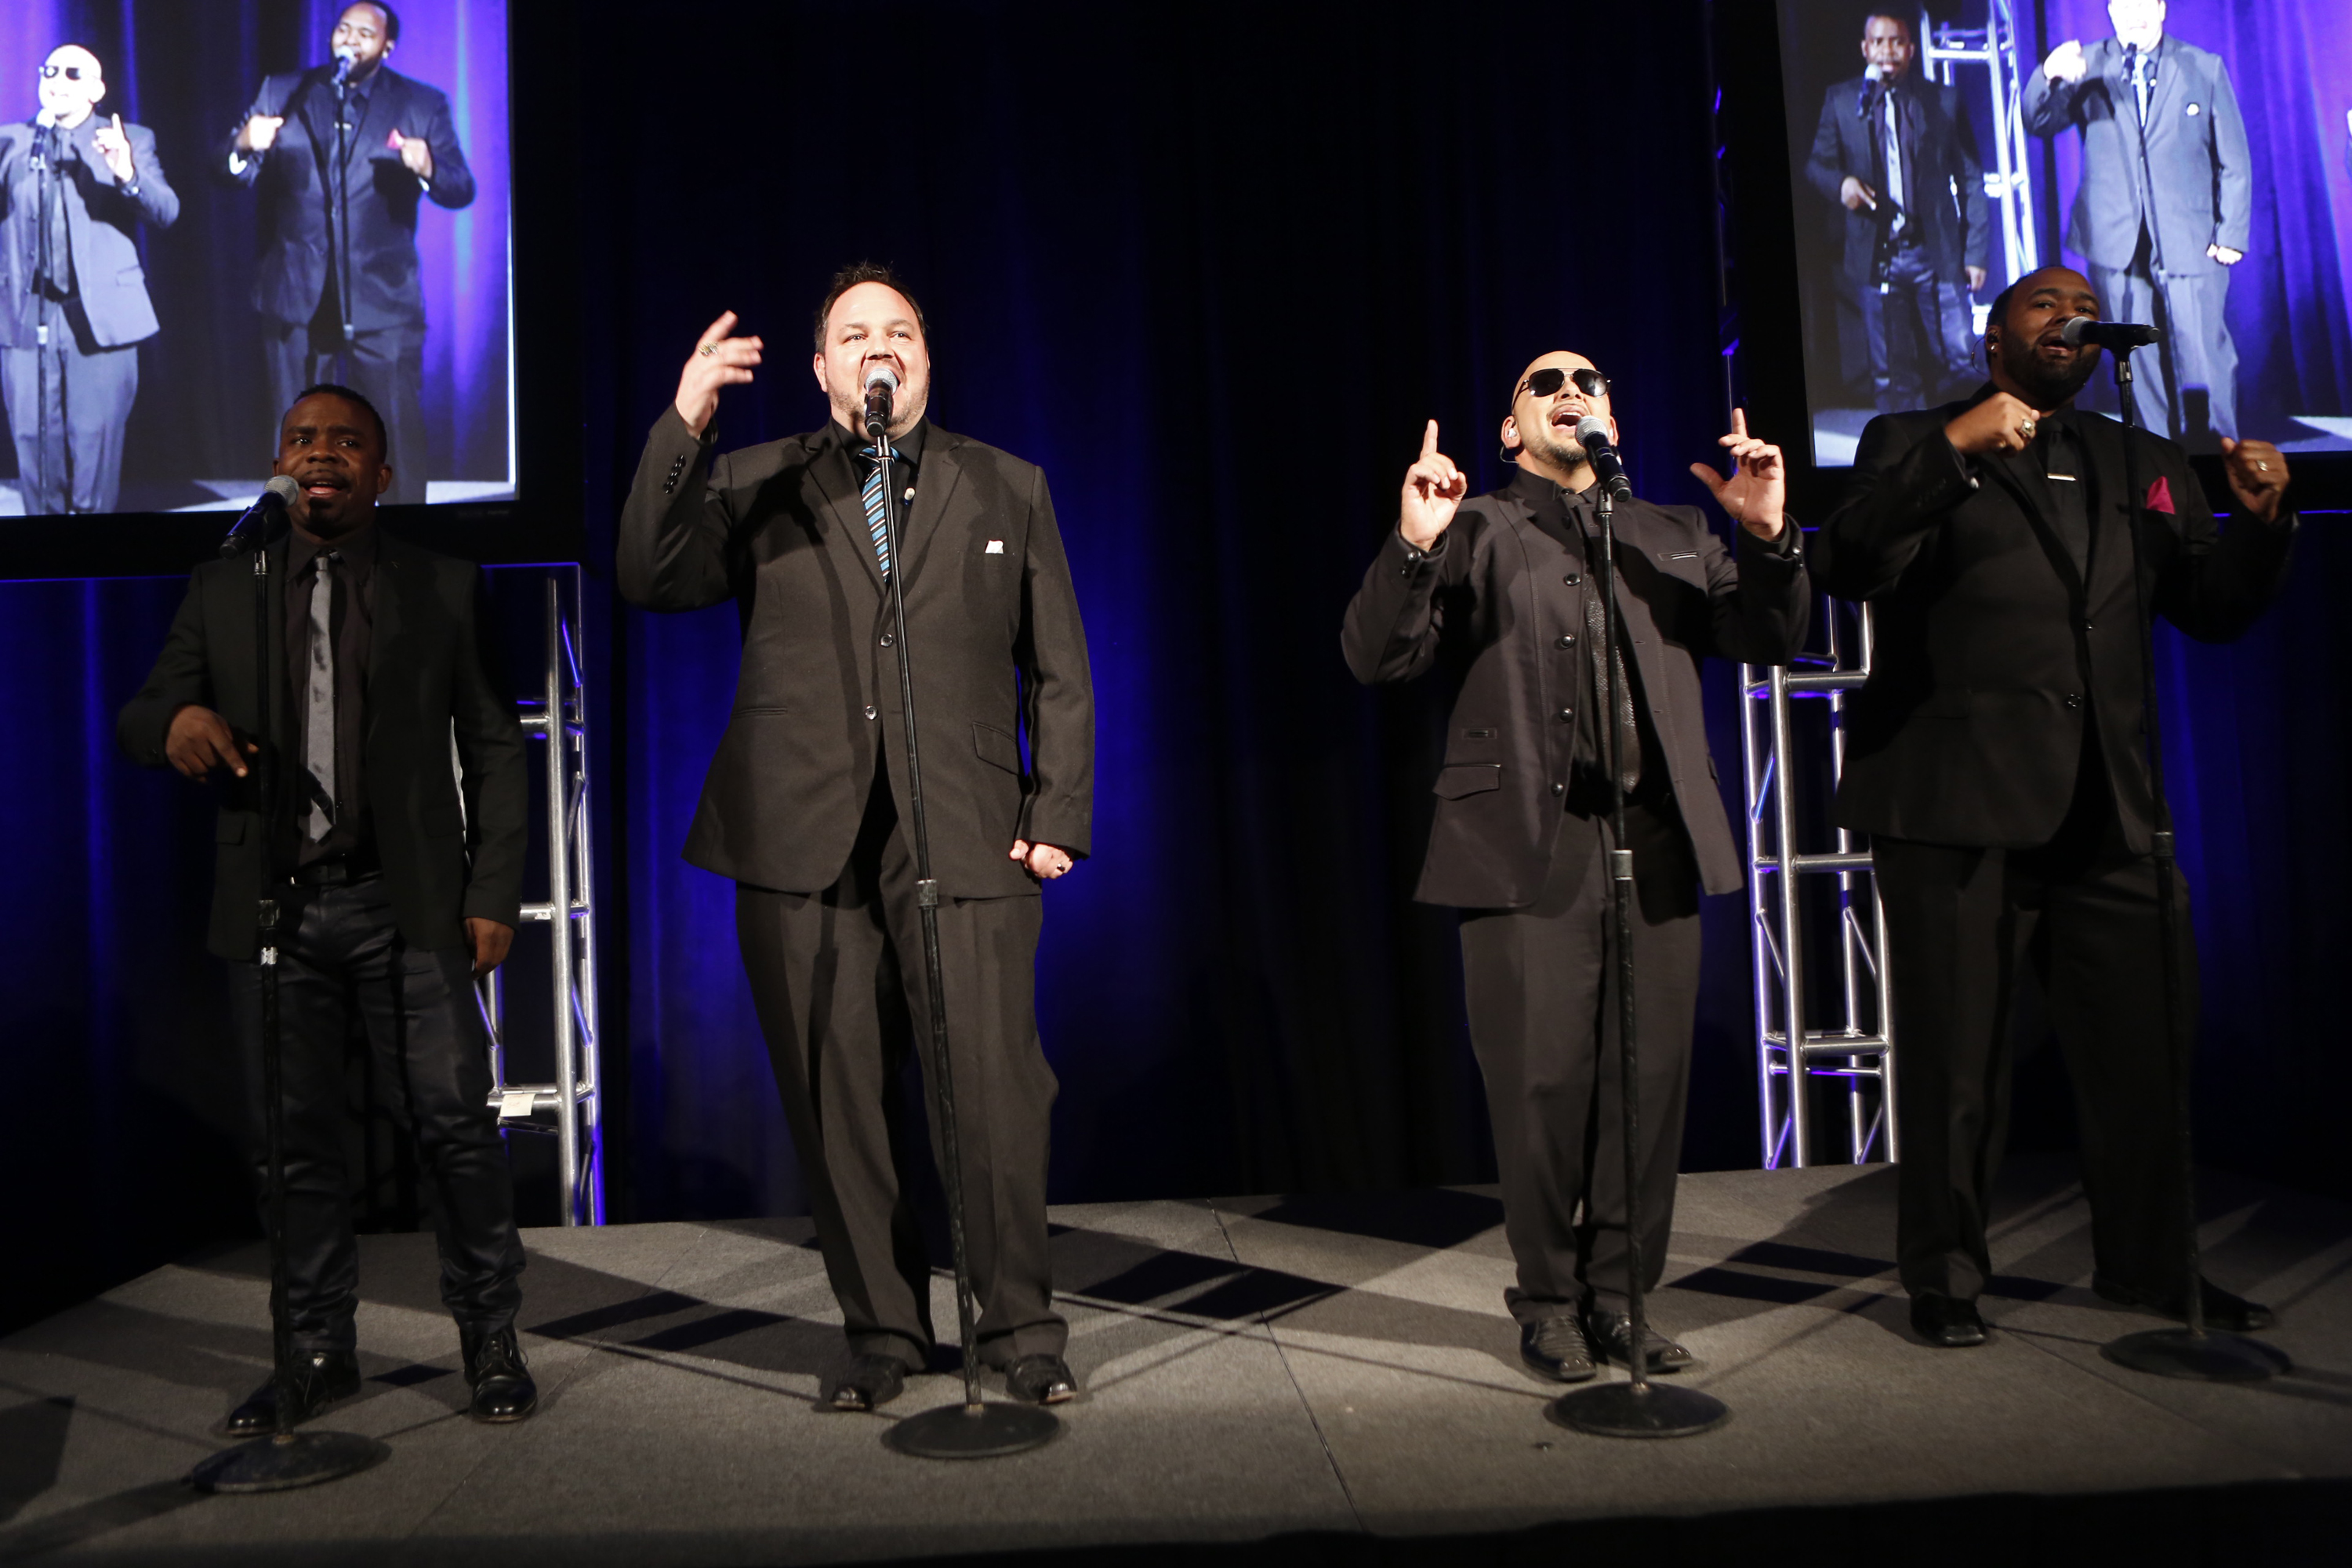 NEW YORK, NY - OCTOBER 13: (L-R) Delious Kennedy, Tony Borowiak, Alfred Nevarez, and Jamie Jones of All-4-One perform at The Resolution Project's Resolve 2016 Gala at The Harvard Club of New York on October 13, 2016 in New York City. (Photo by Thos Robinson/Getty Images for The Resolution Project)